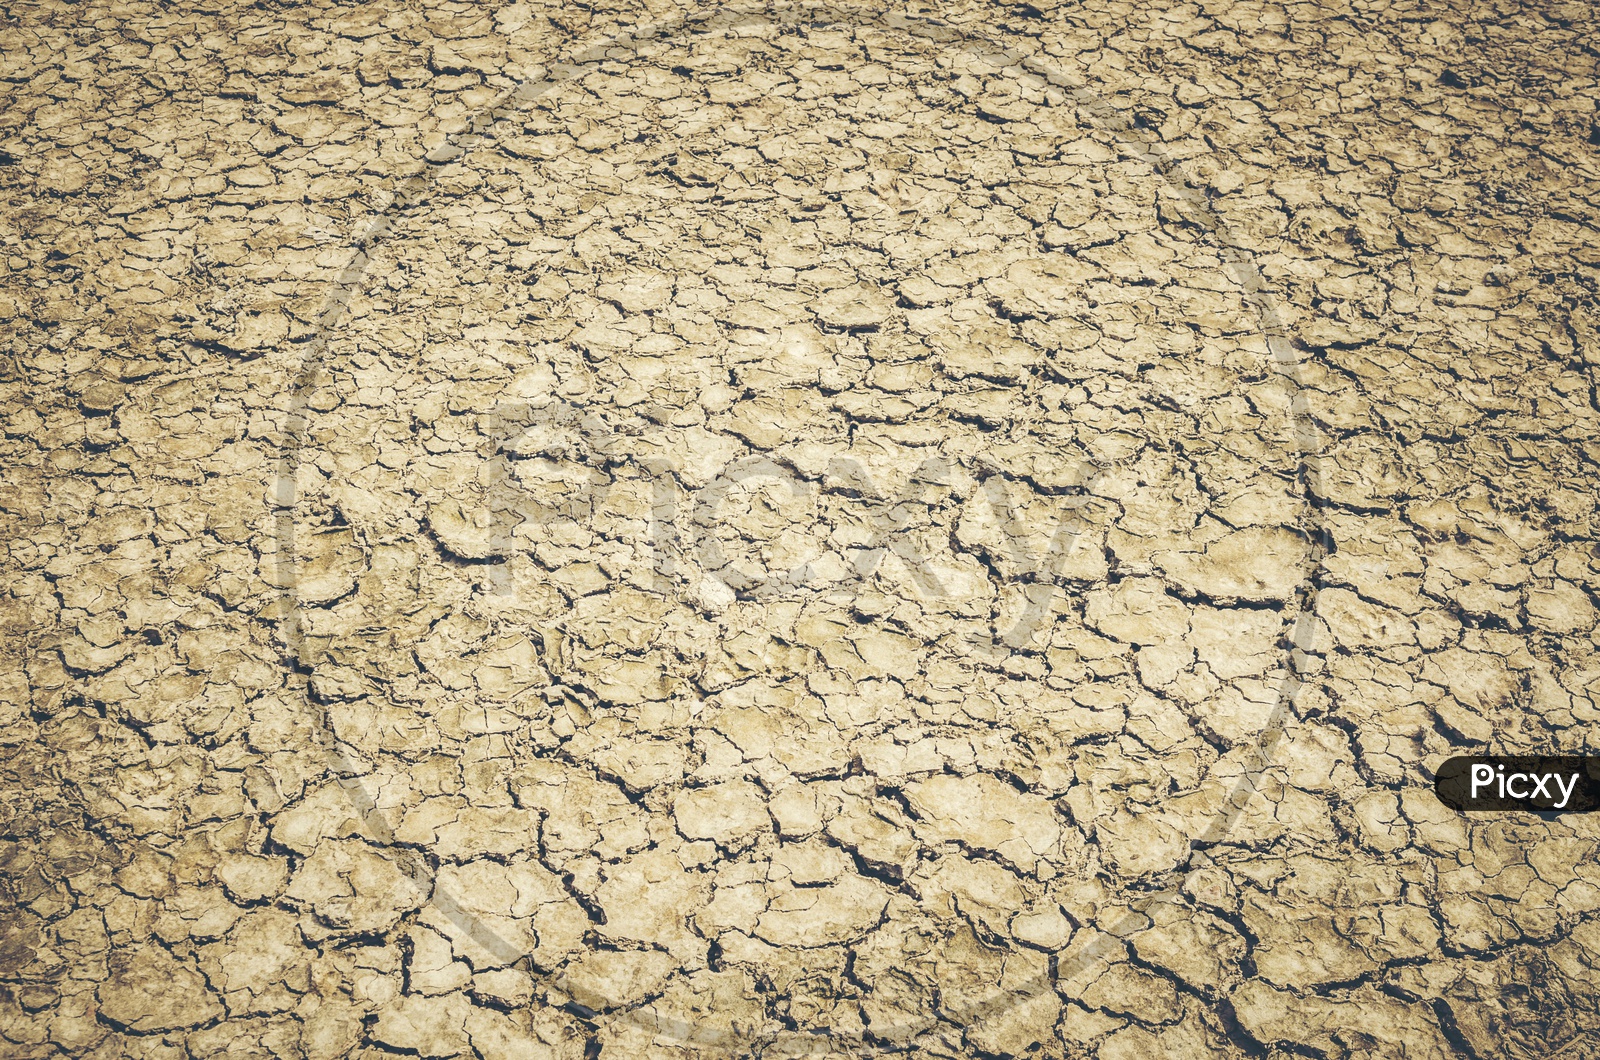 Drought Land With Dry Cracked Soil Texture